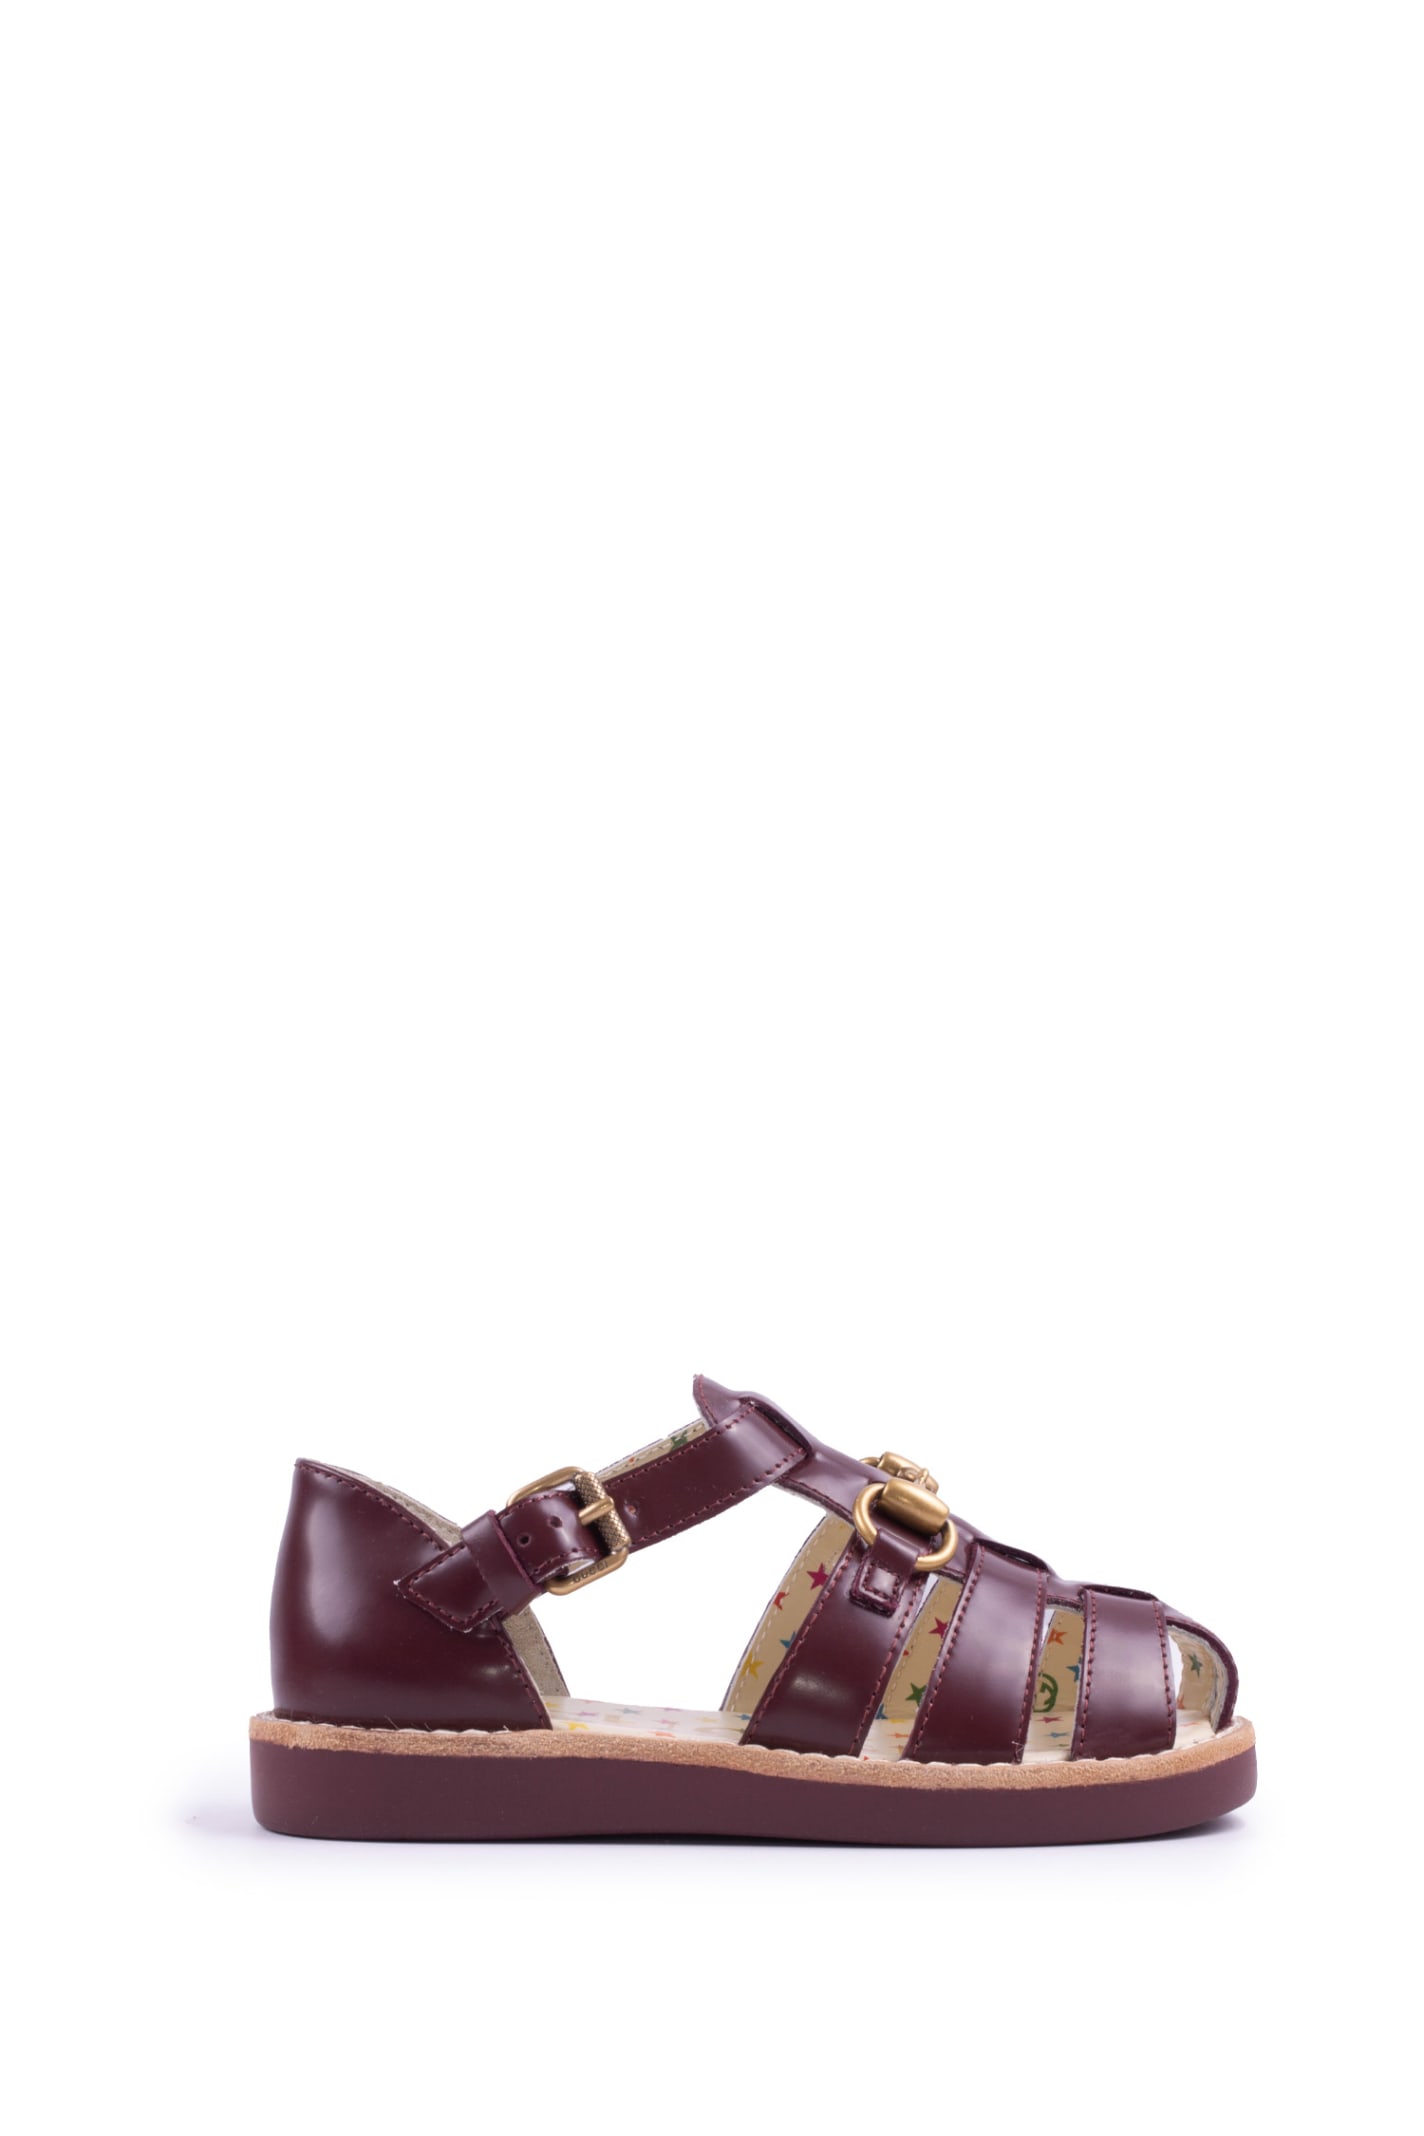 Gucci Babies' Toddlers Sandal With Horsebit In Brown